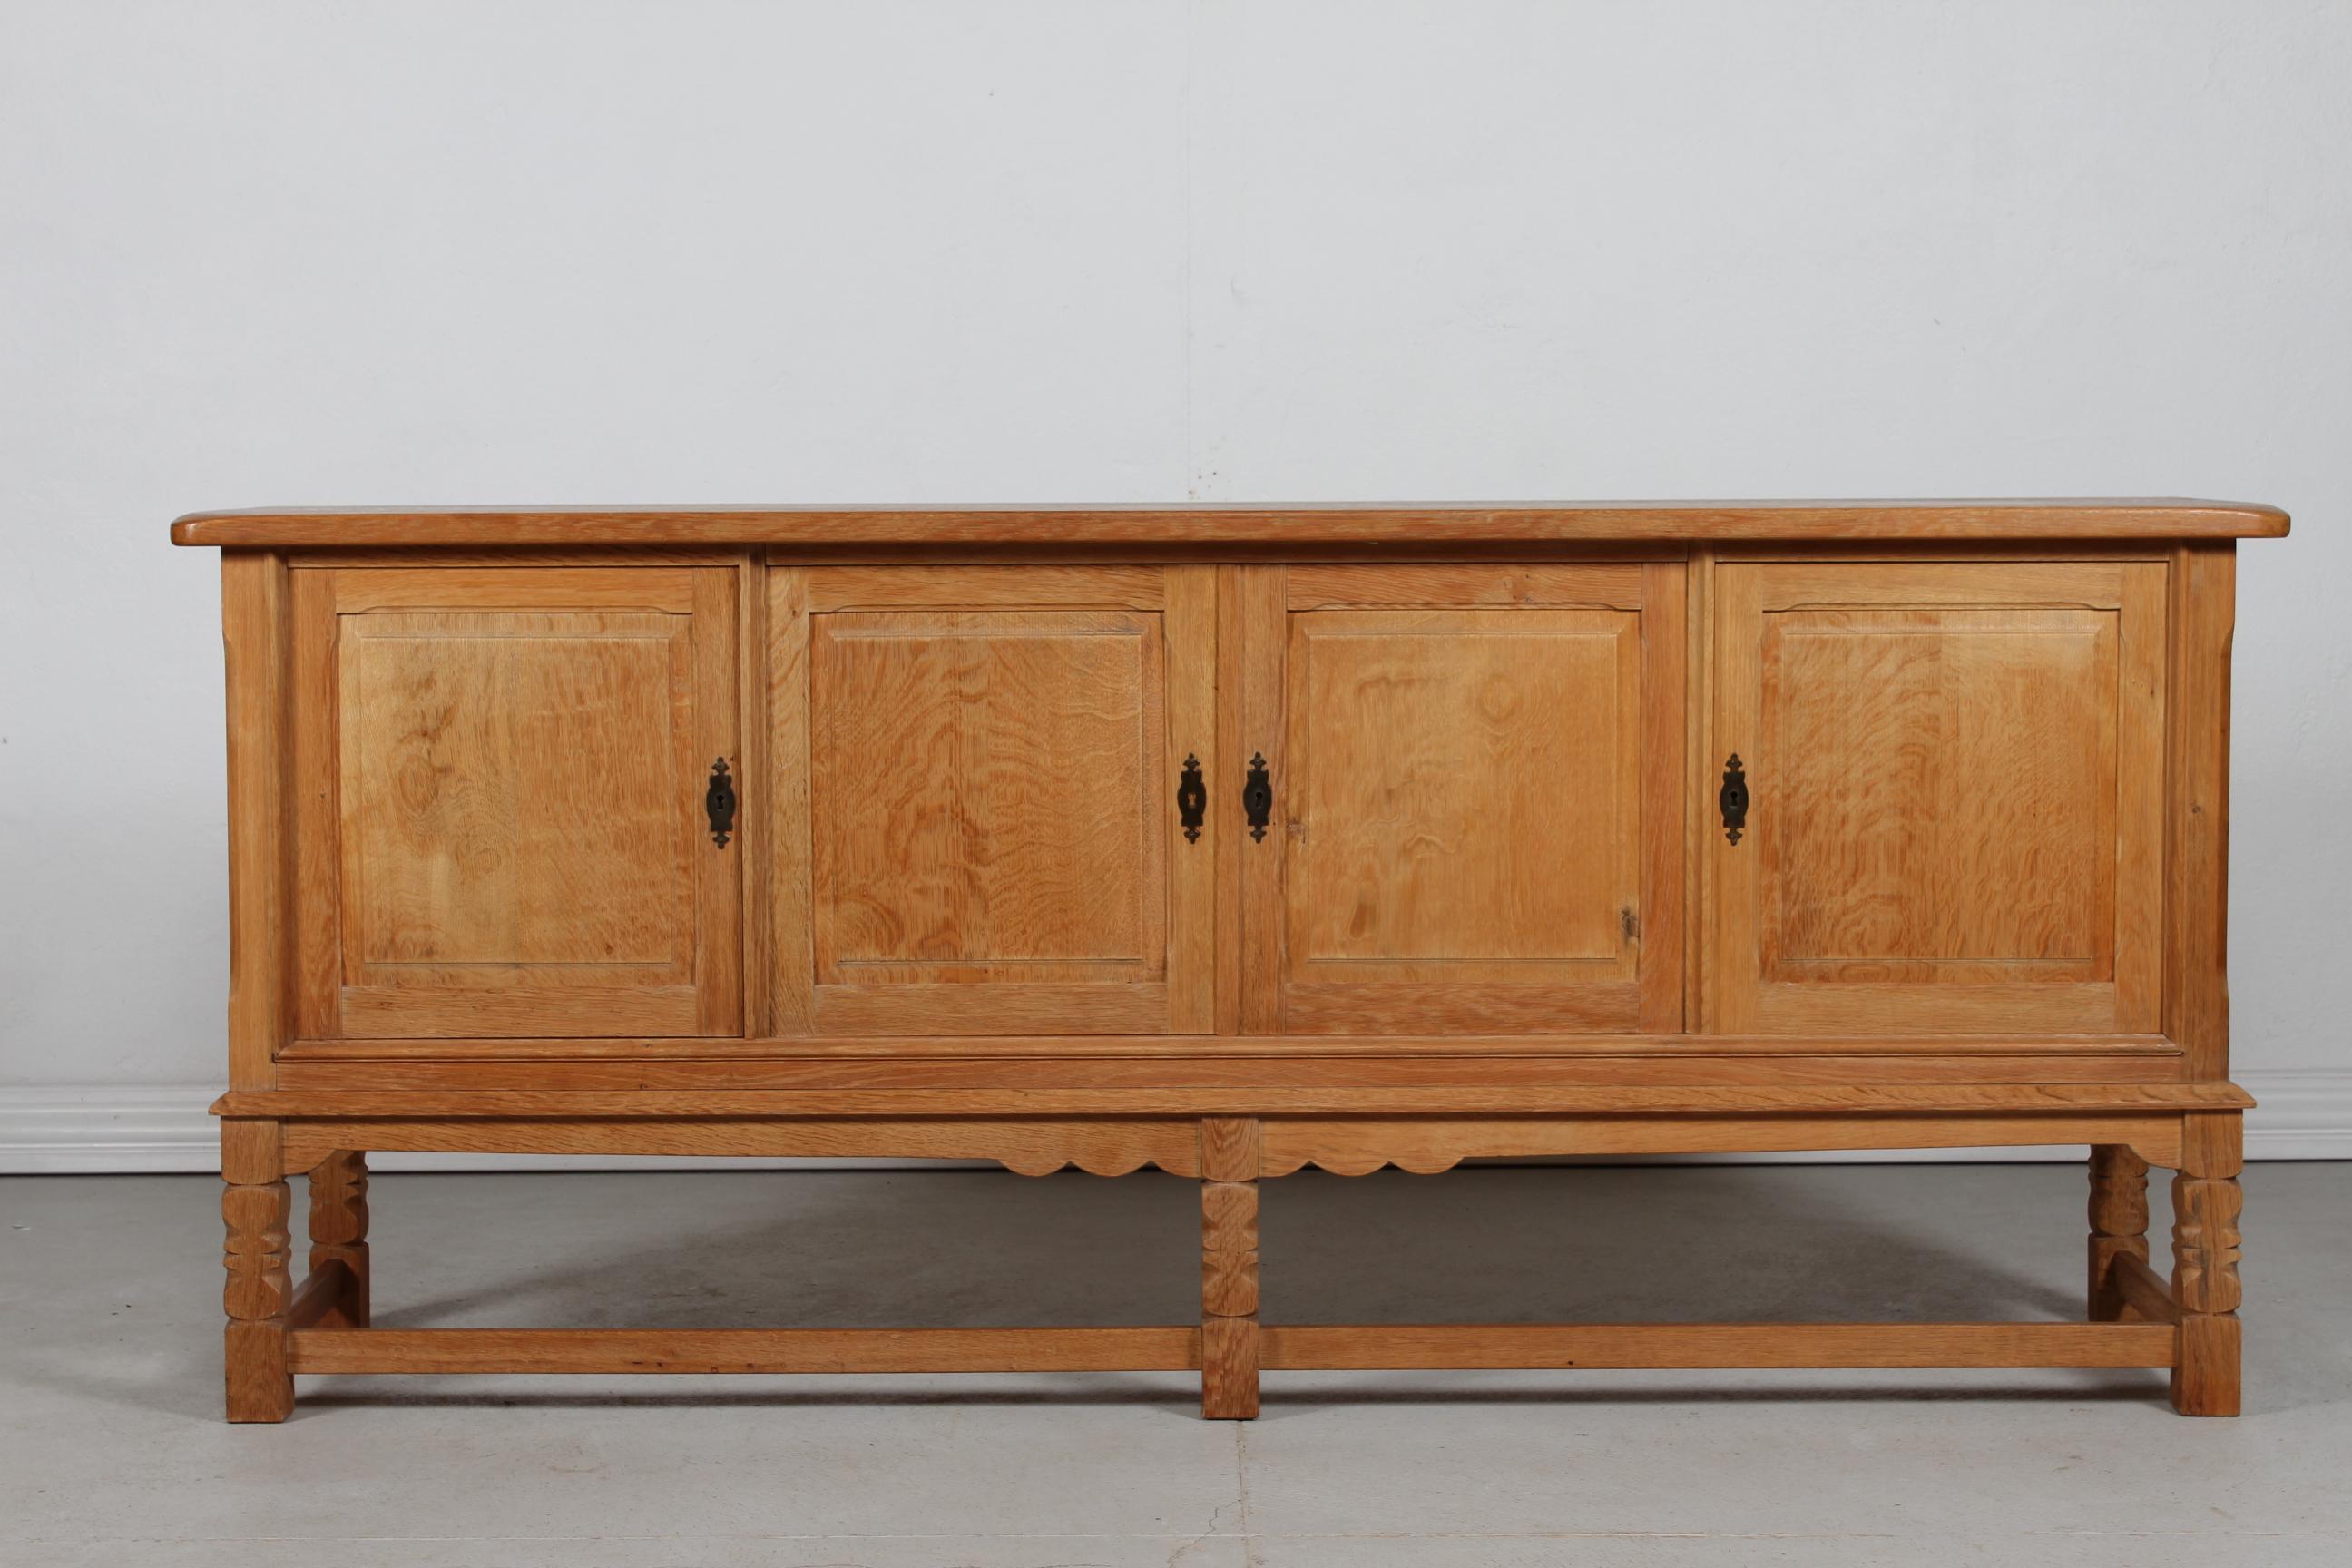 Long sideboard attr. to designer Henning Kjærnulf and most likely manufactured by the Danish company Nyrup Møbelfabrik/ EG Furniture, Denmark in the 1970s.

The country style sideboard is made of solid- and veneer oak and has four raised panel doors